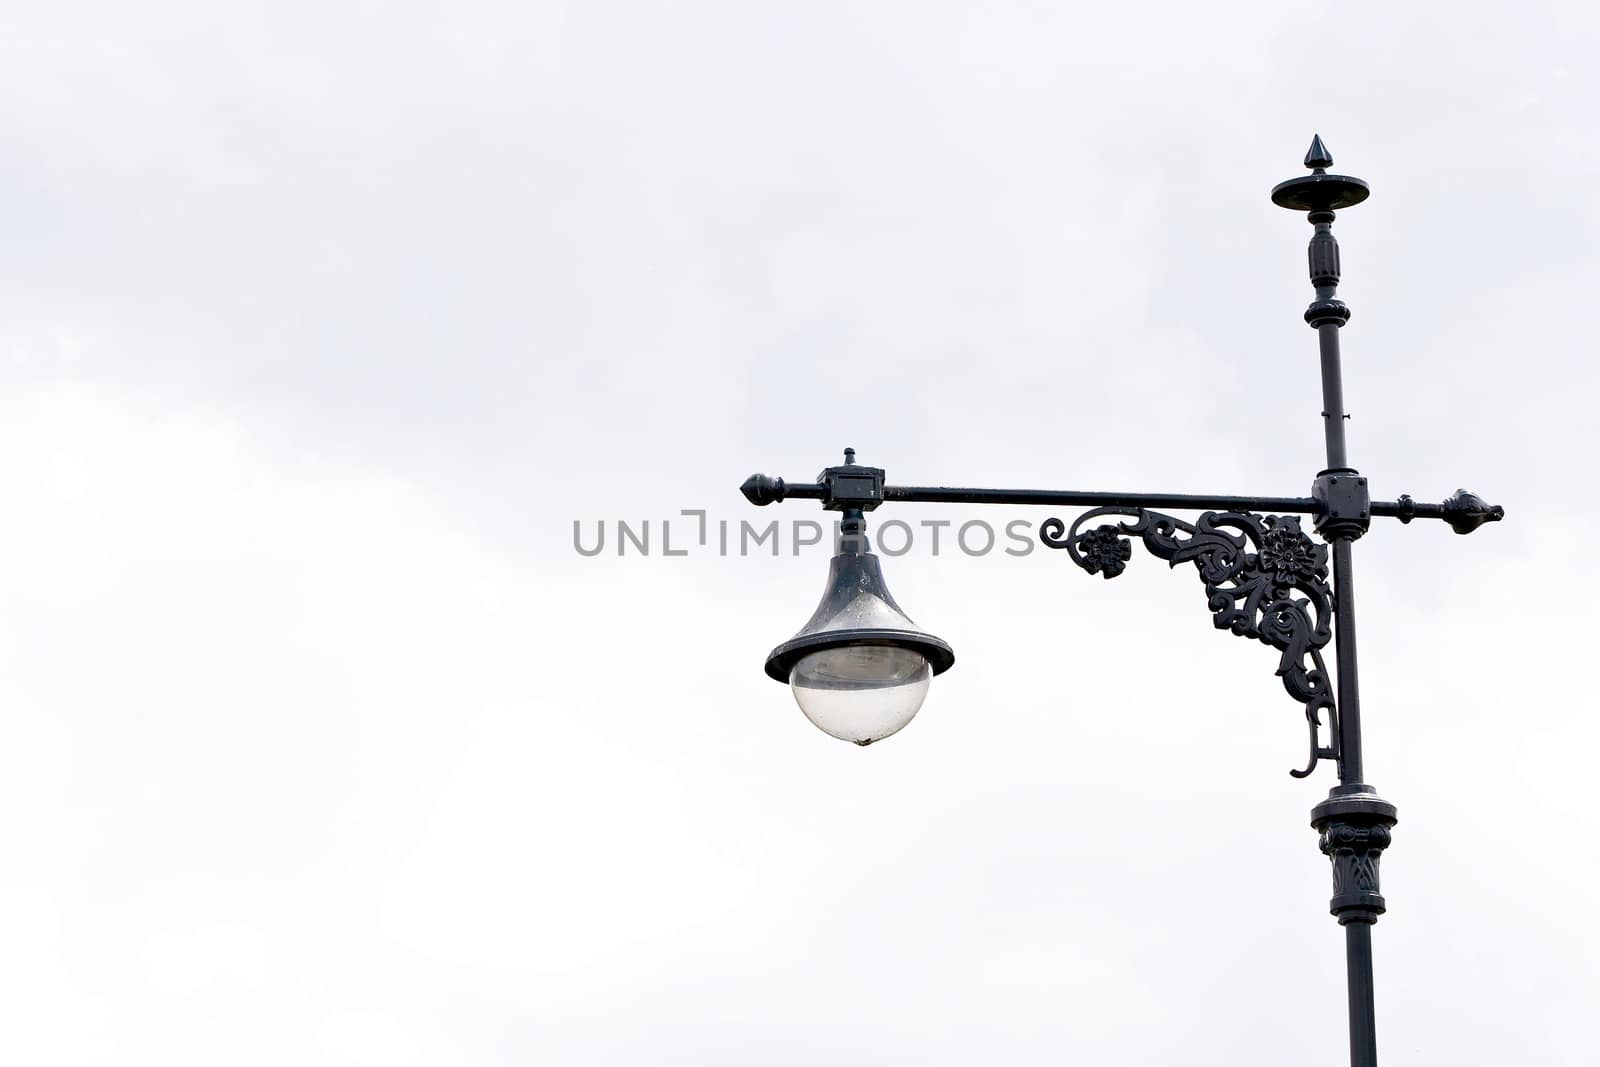 lamppost by vichie81